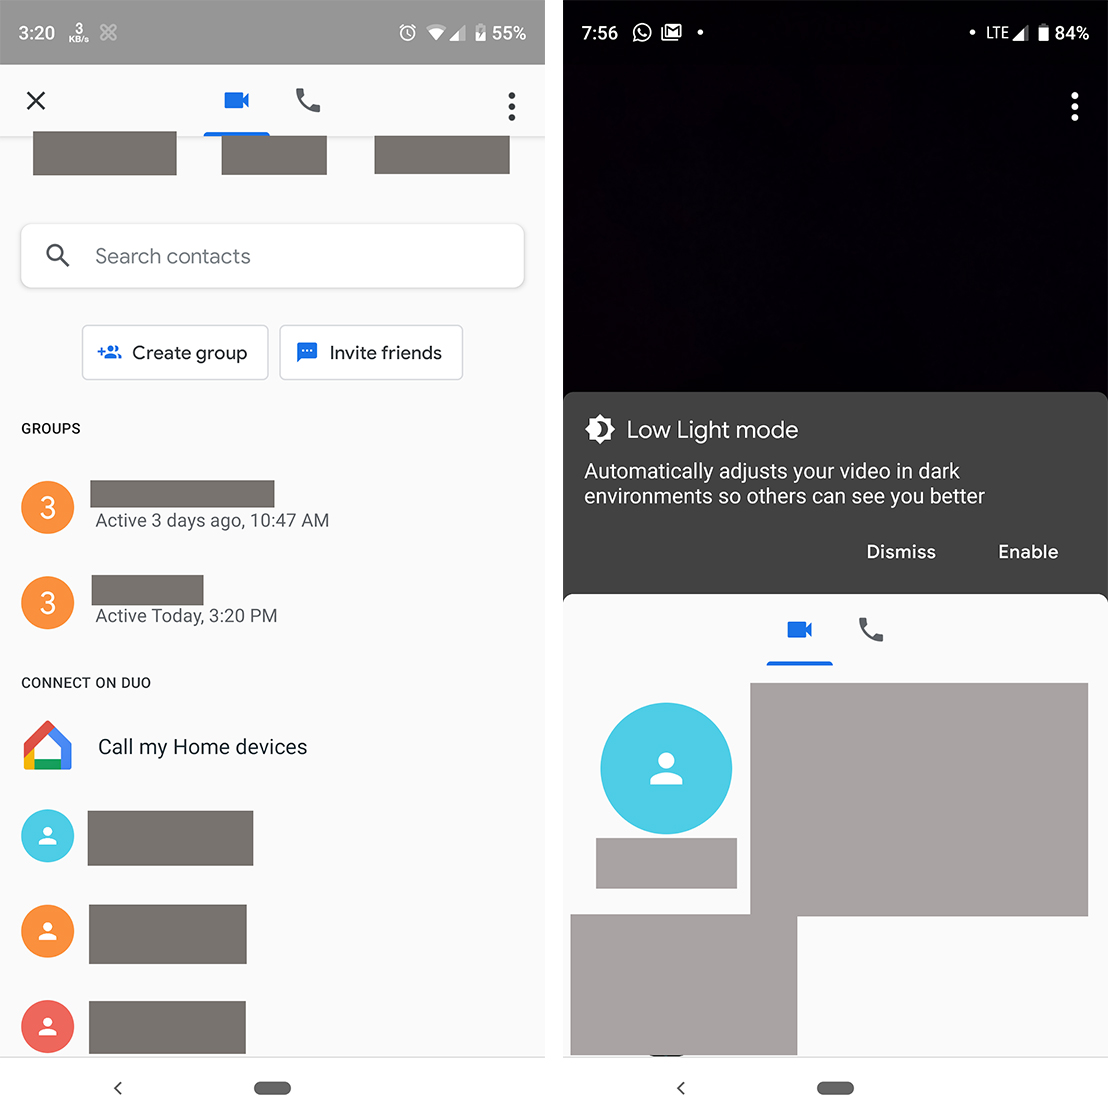 Google Dup low light and 'Call my Home Devices' features